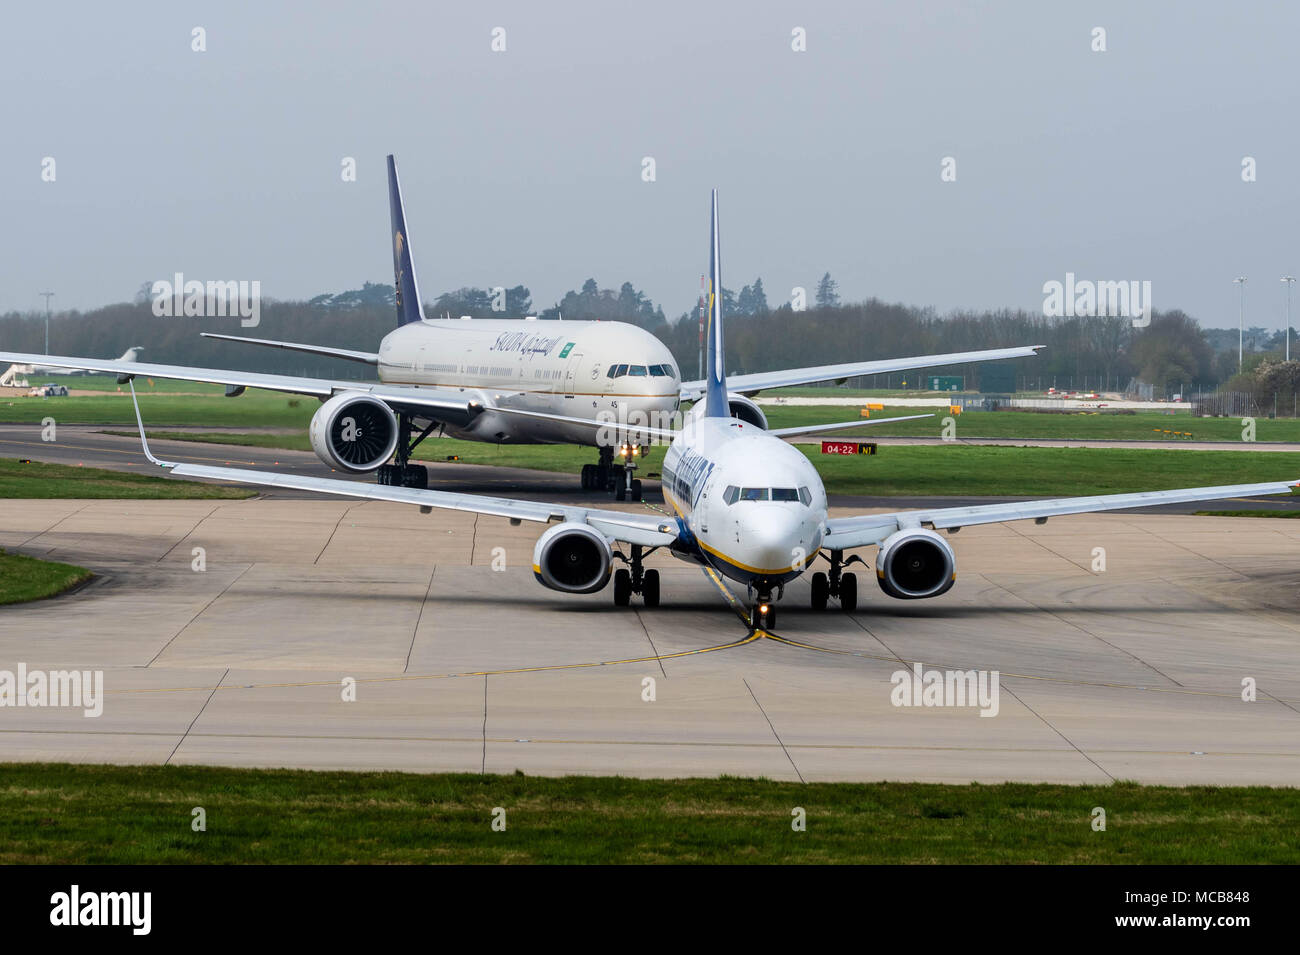 Stansted Airport, Essex, 15th April 2018  Aircraft movements at a foggy Stansted Airport in Essex, UK Ei-dcj Ryanair Boeing 737-8AS is followed by HZ-AK45 Saudi Arabian Airlines Boeing 777-300 on the taxi way Credit: Ian Davidson/Alamy Live News Stock Photo